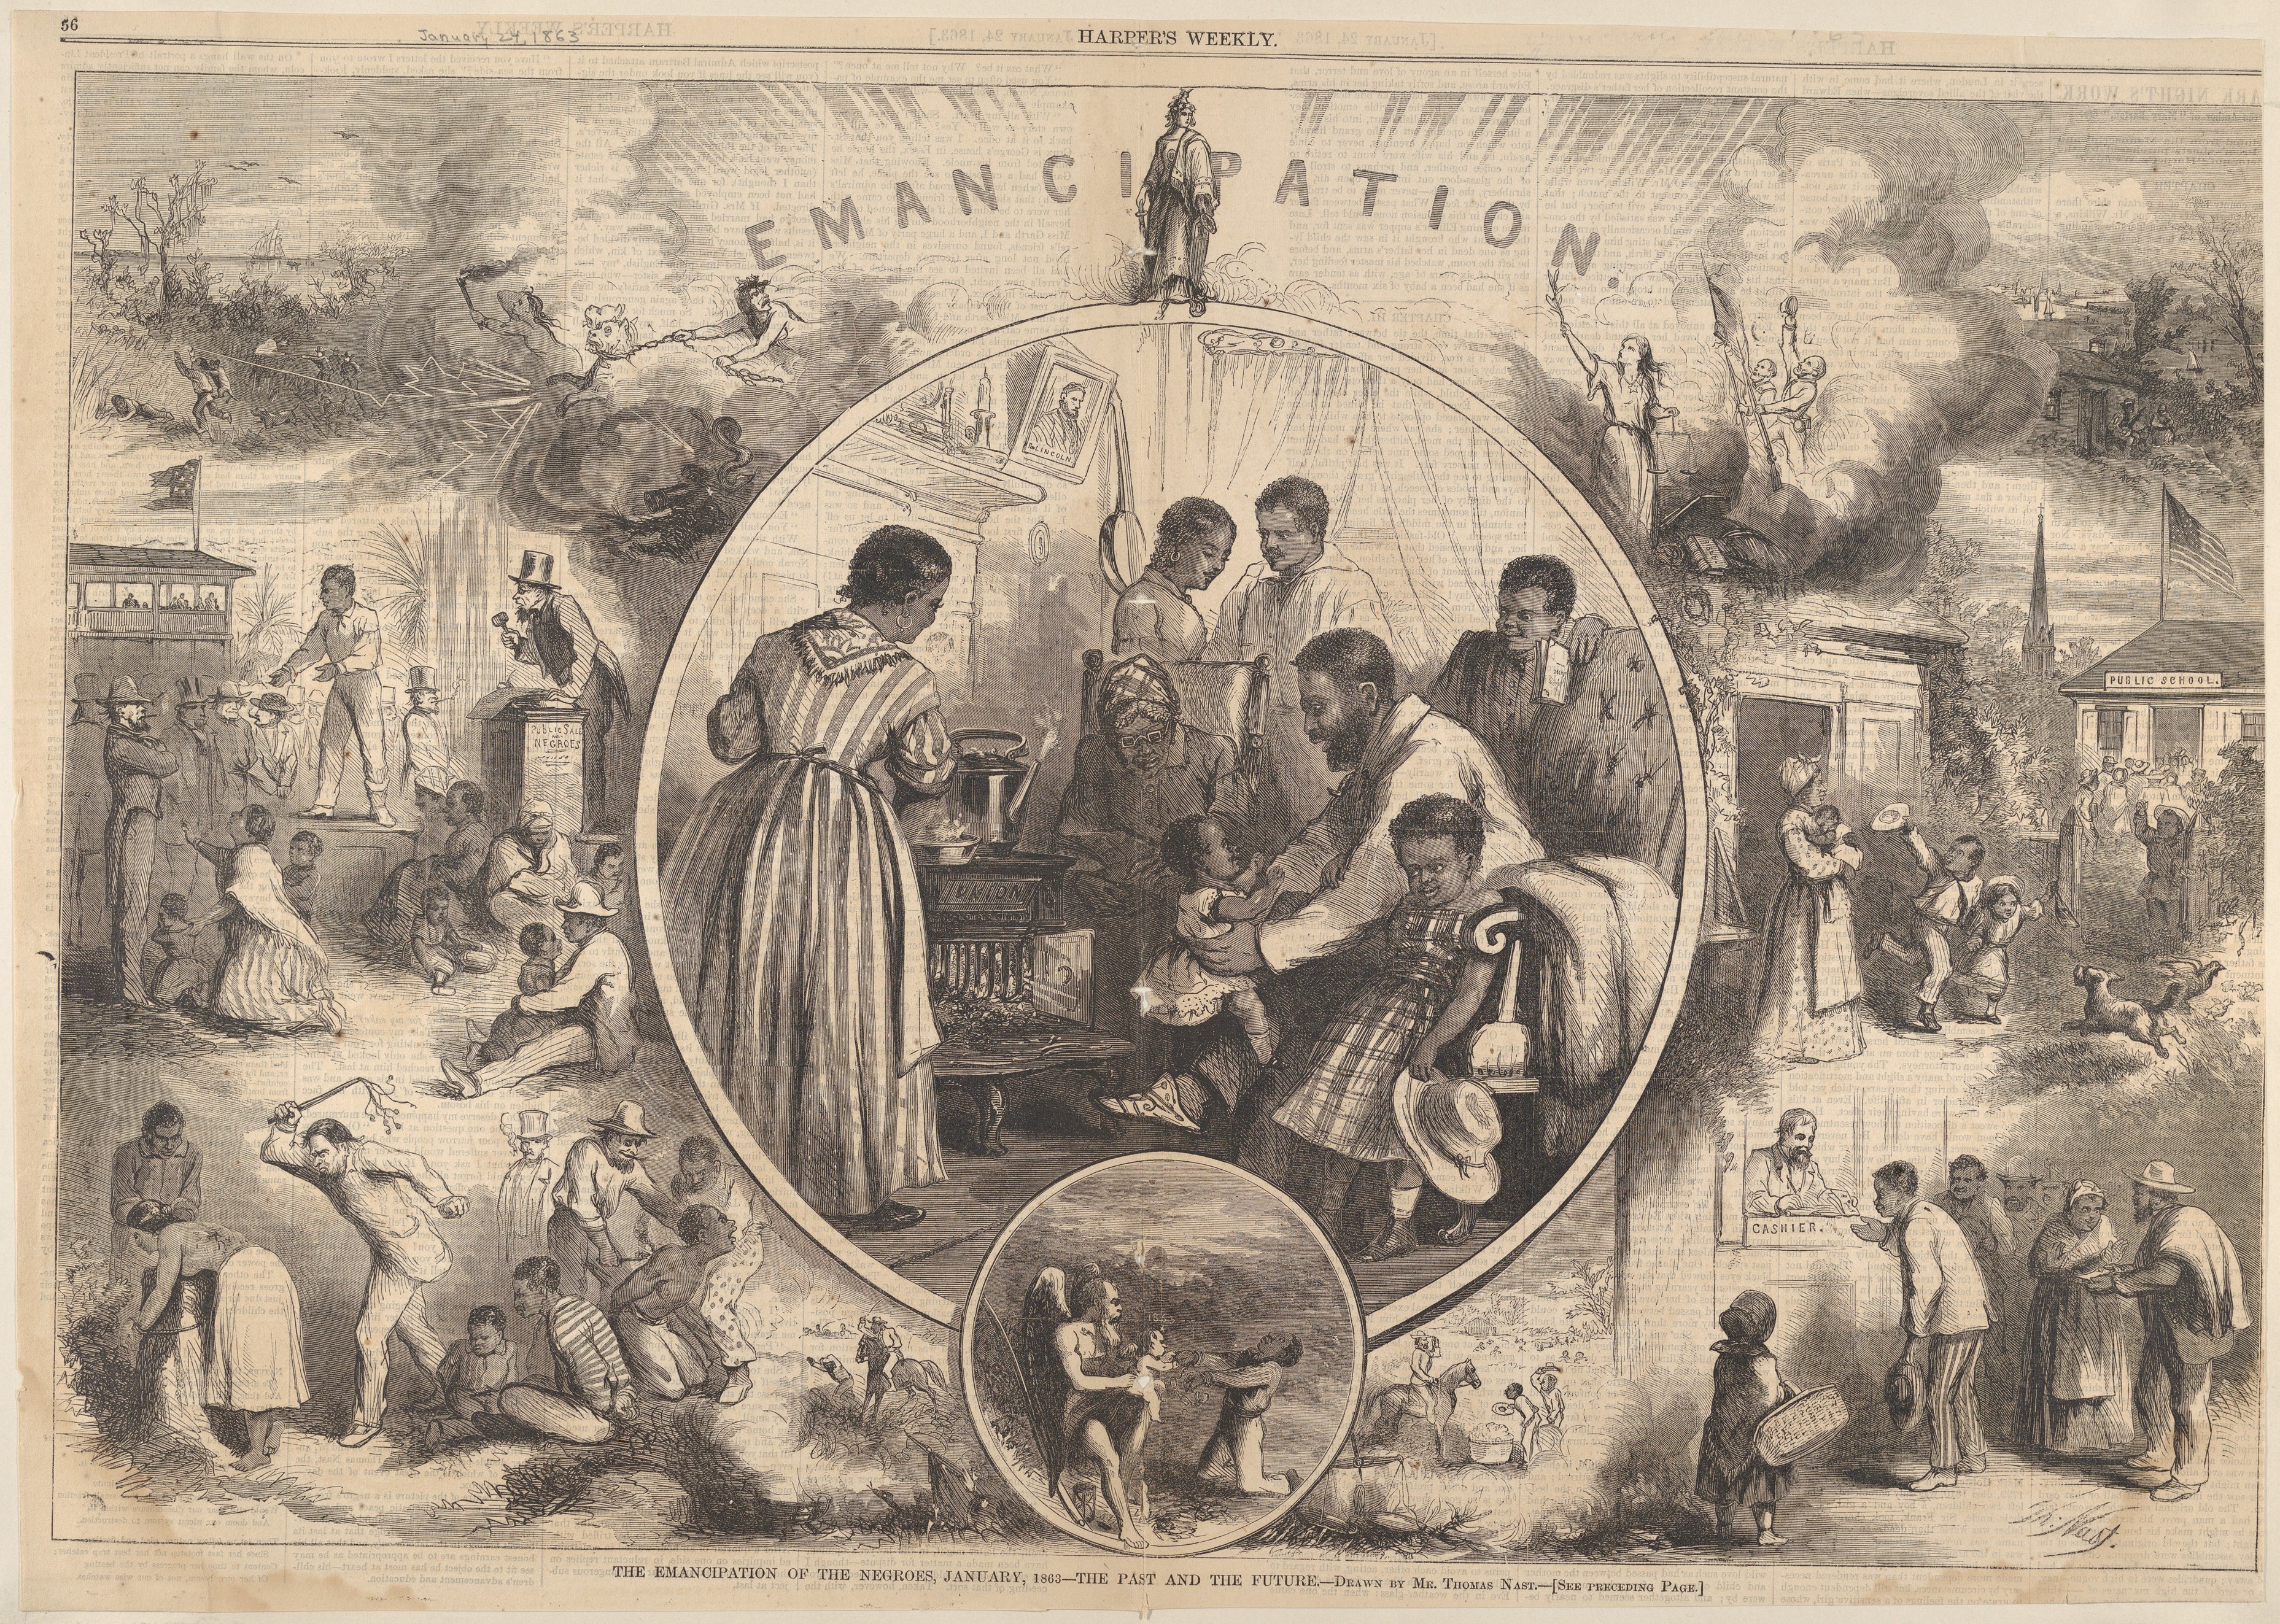 Thomas-Nast-Emancipation-The-past-and-the-future-Harpers-Weekly-January-24-1863